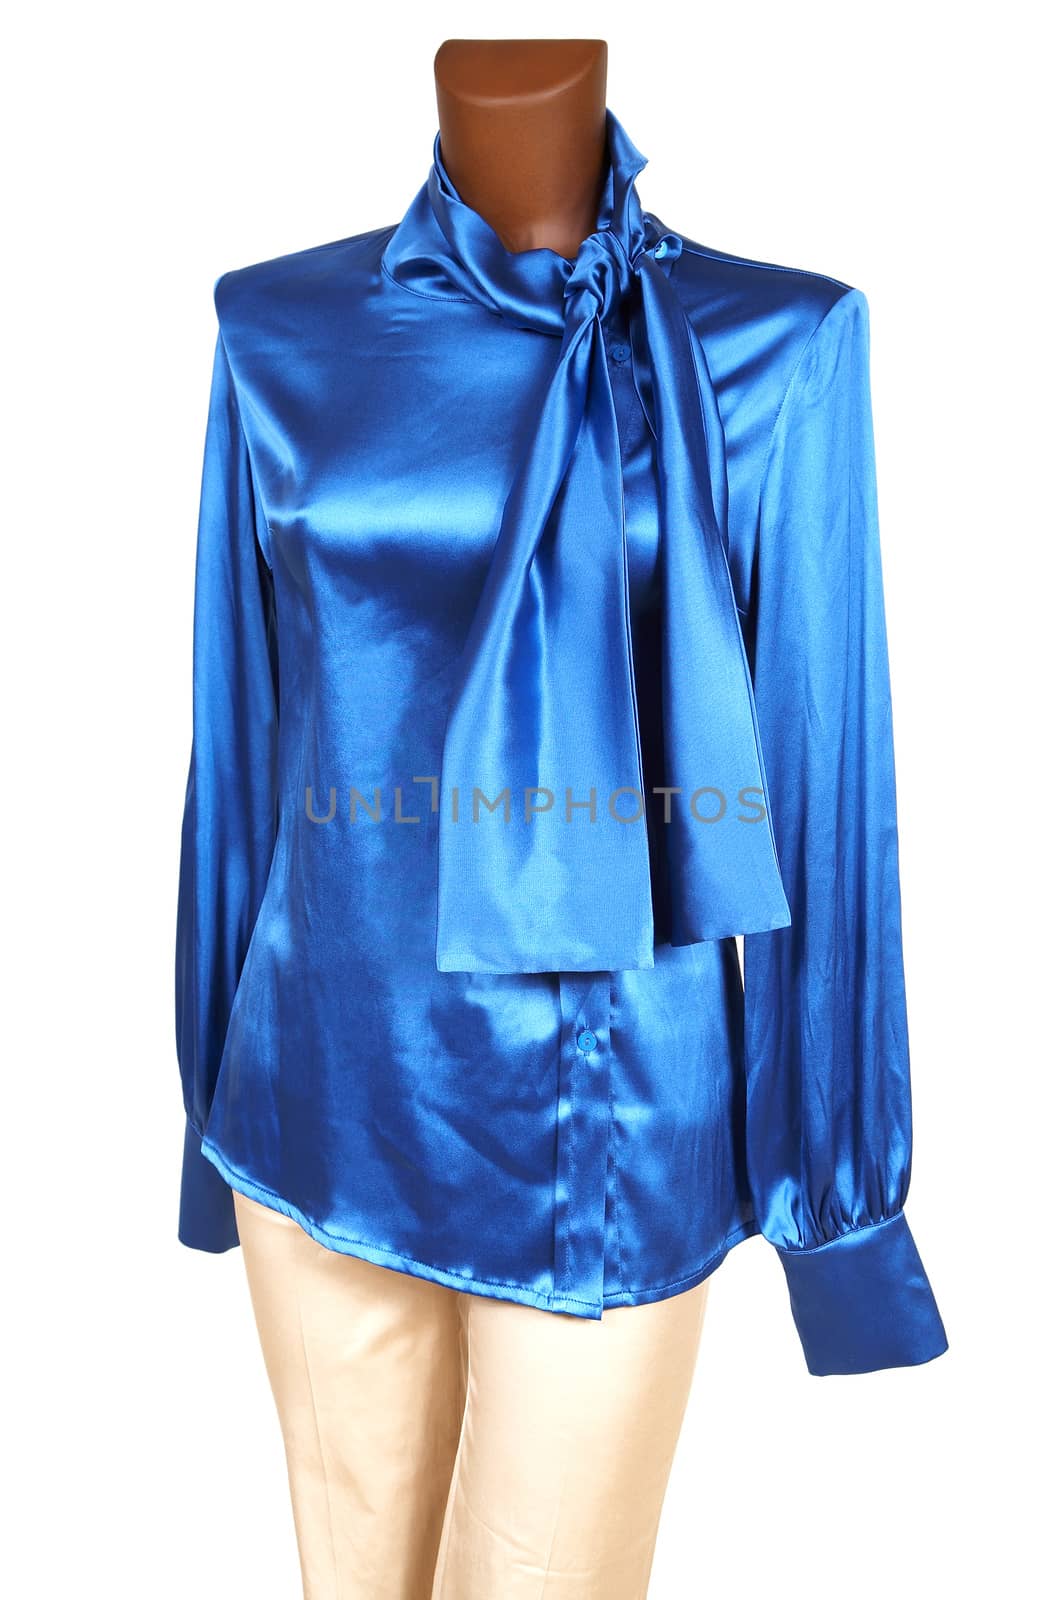 Blue silk blouse on a white background